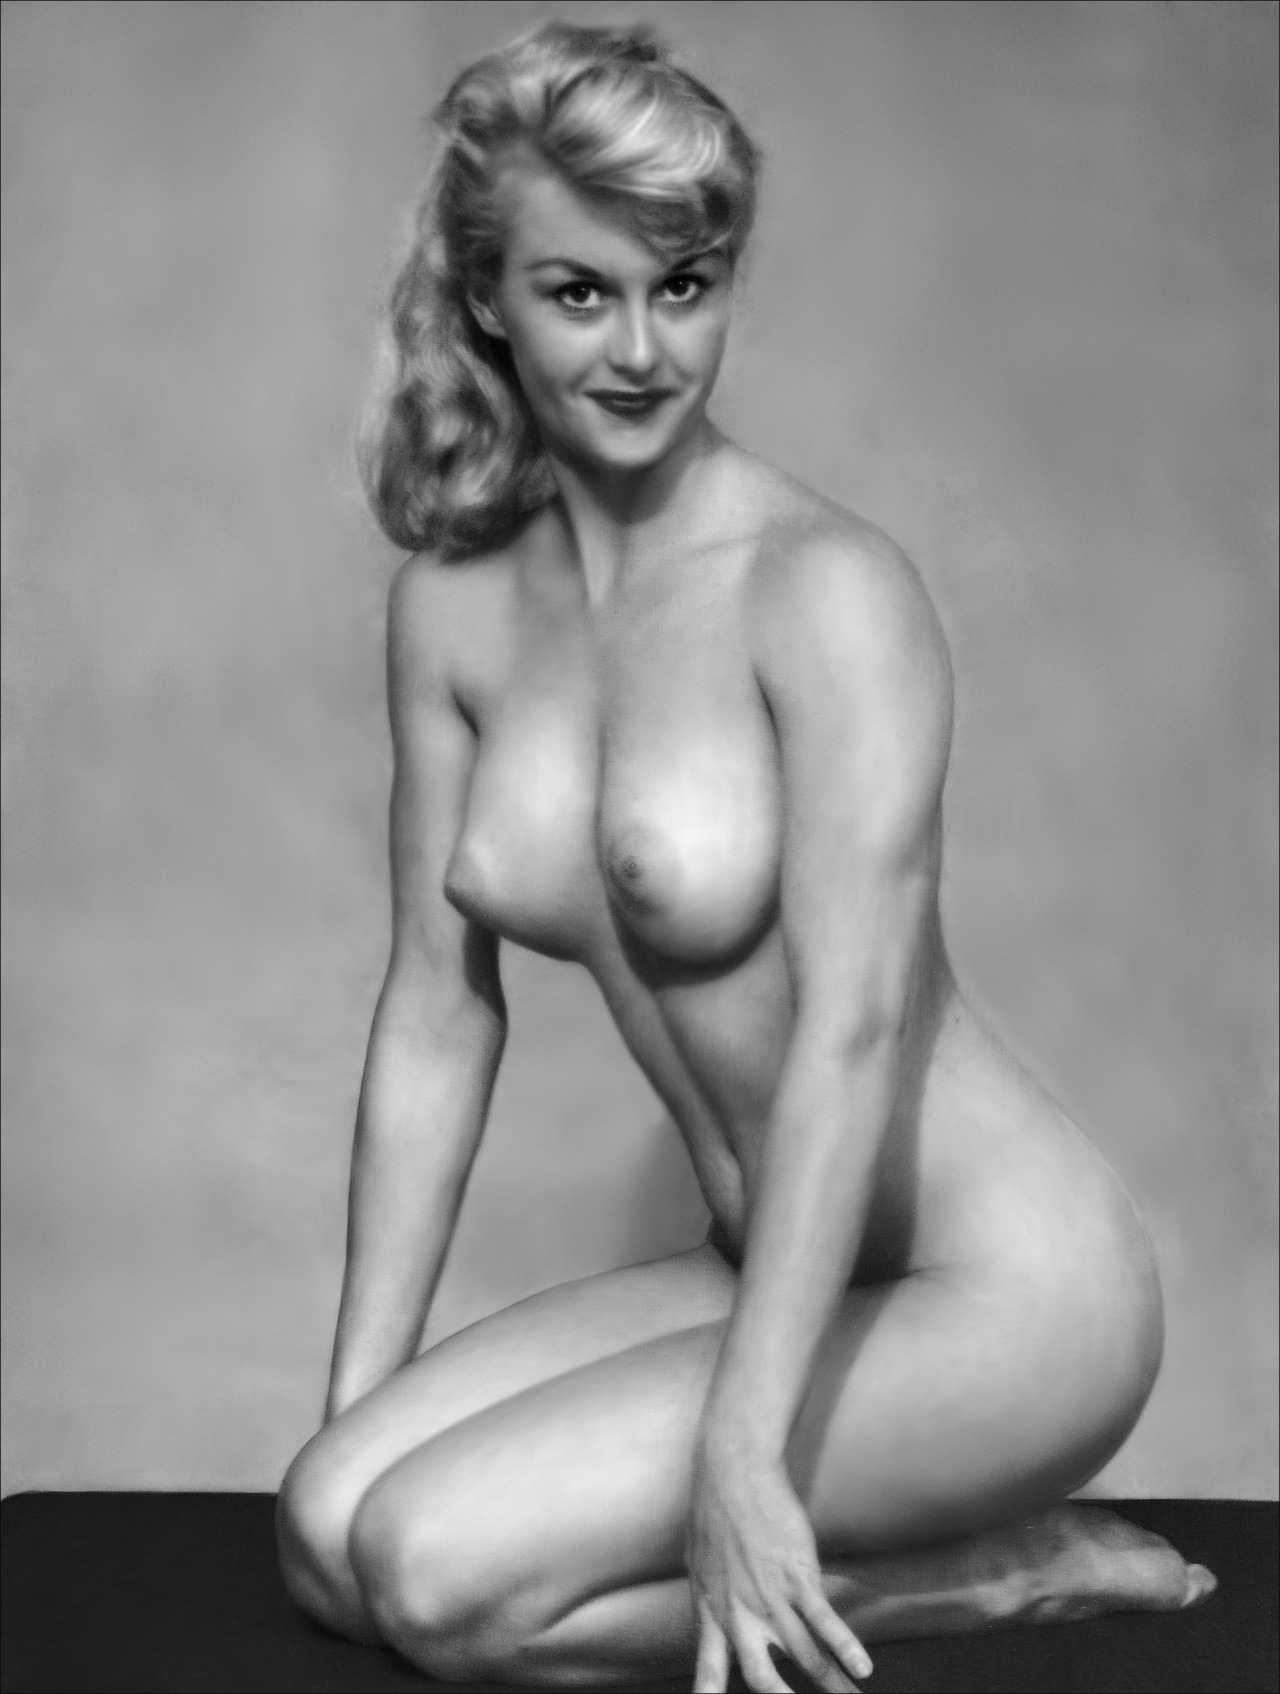 Classic Pin Up Look - Pinup style hotty porn pic. 